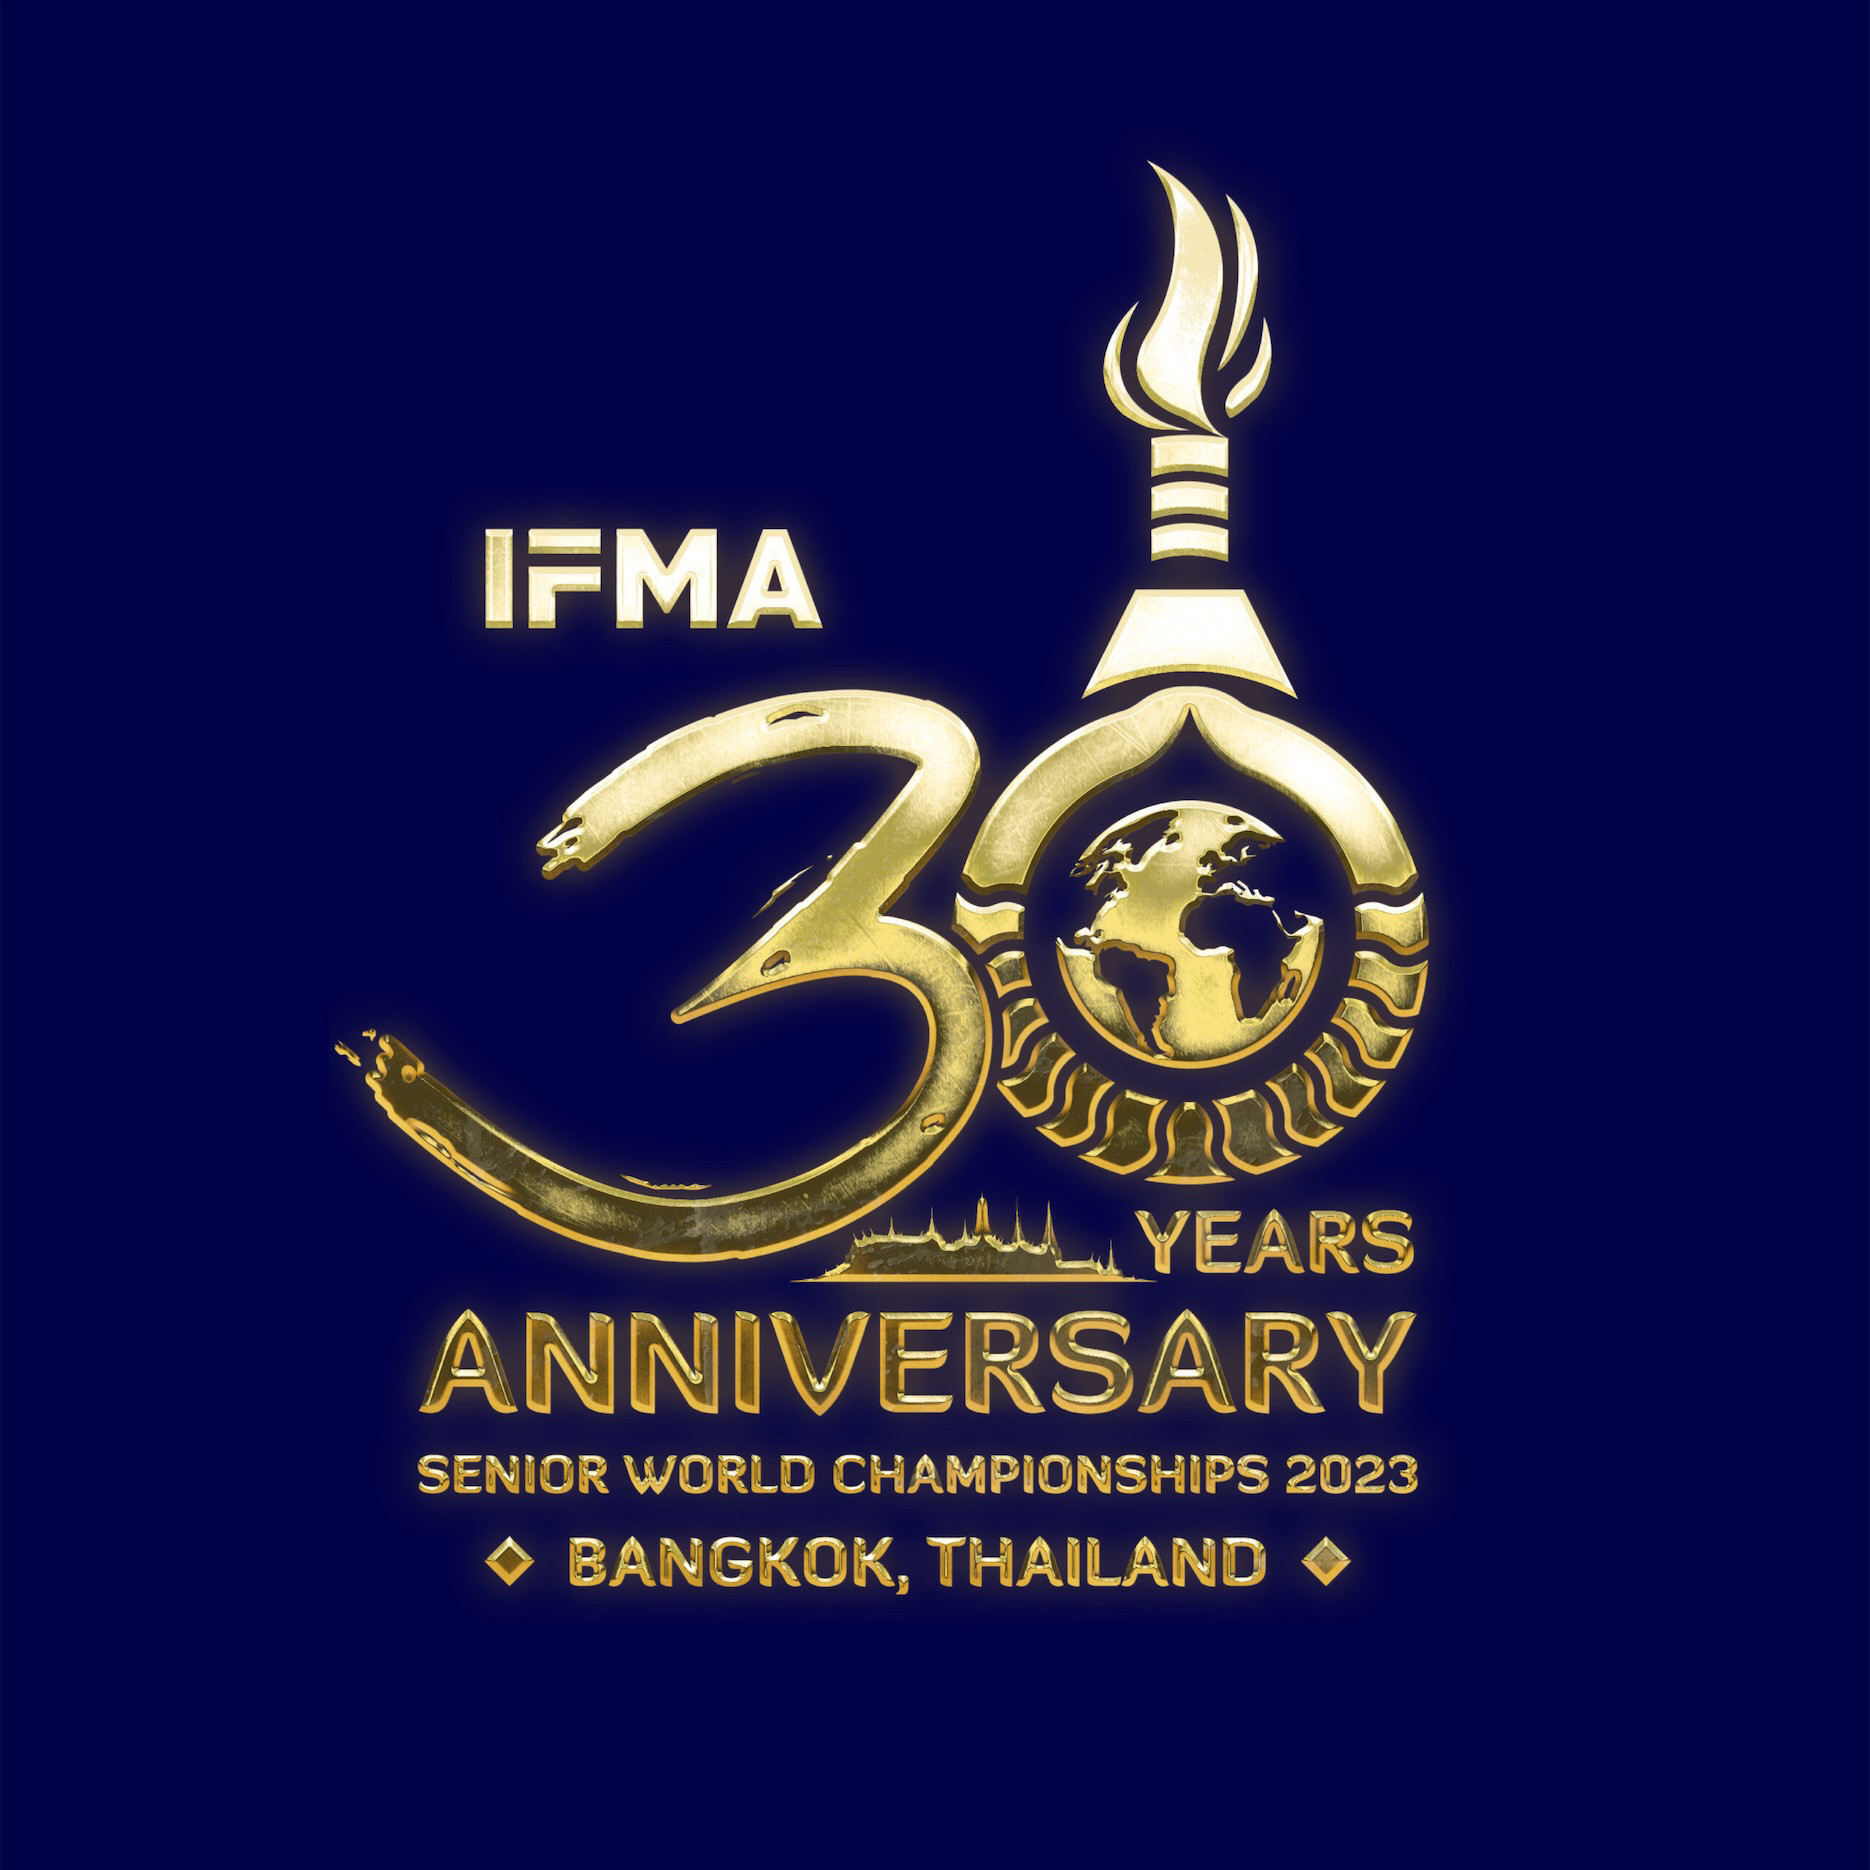 IFMA set to celebrate 30th anniversary with World Championships in Bangkok